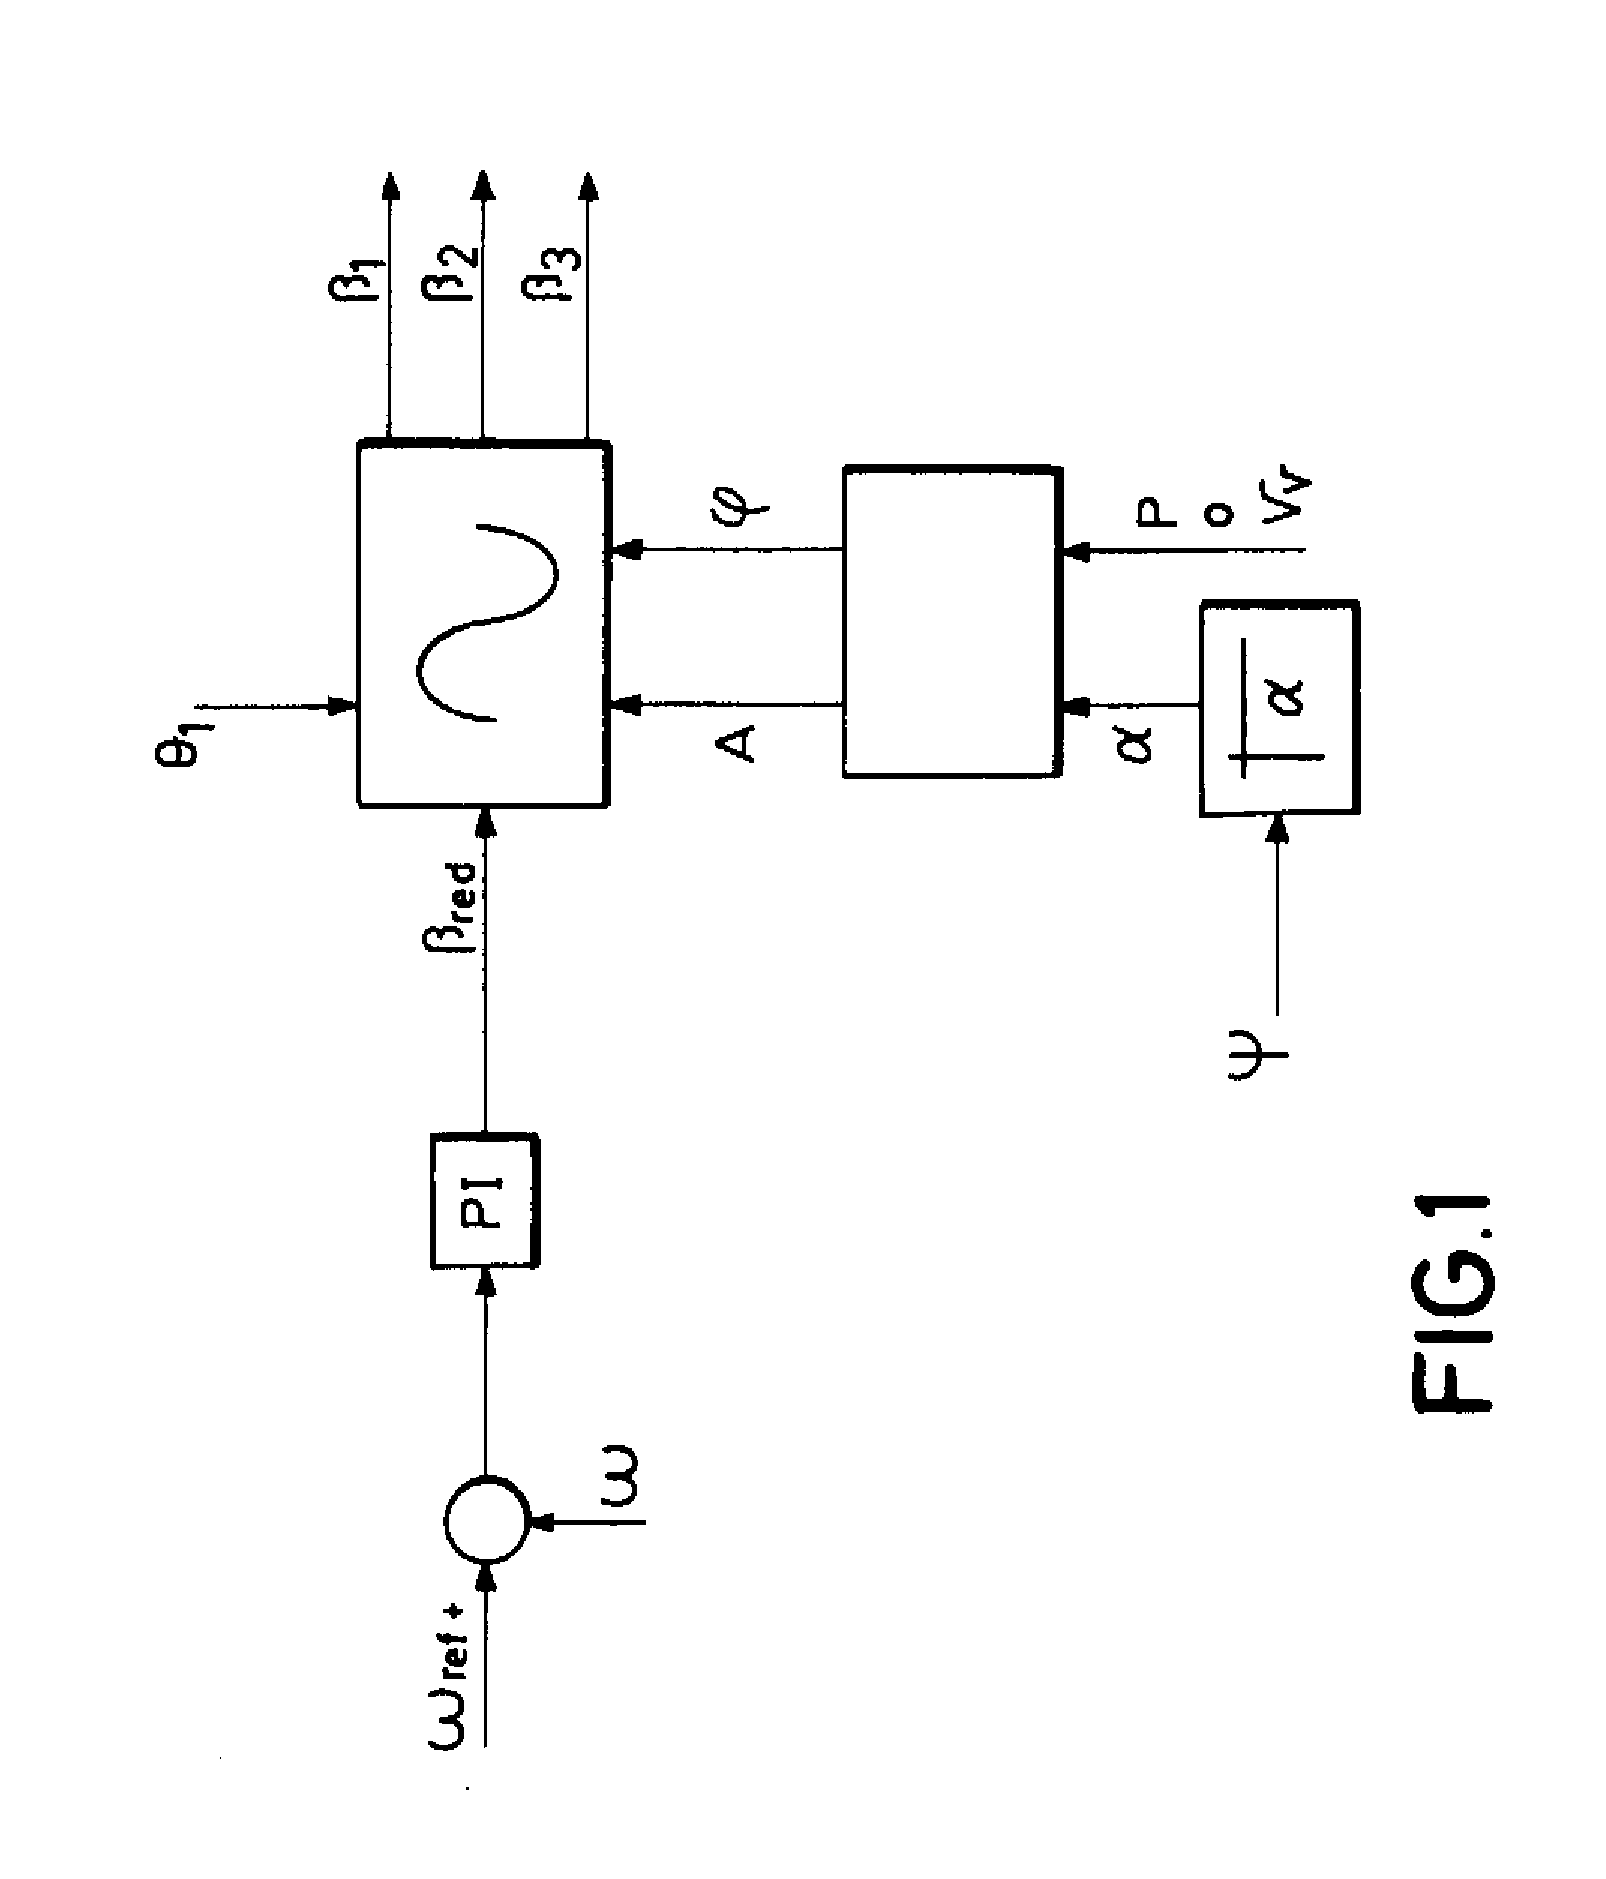 System and Method of Controlling a Wind Turbine